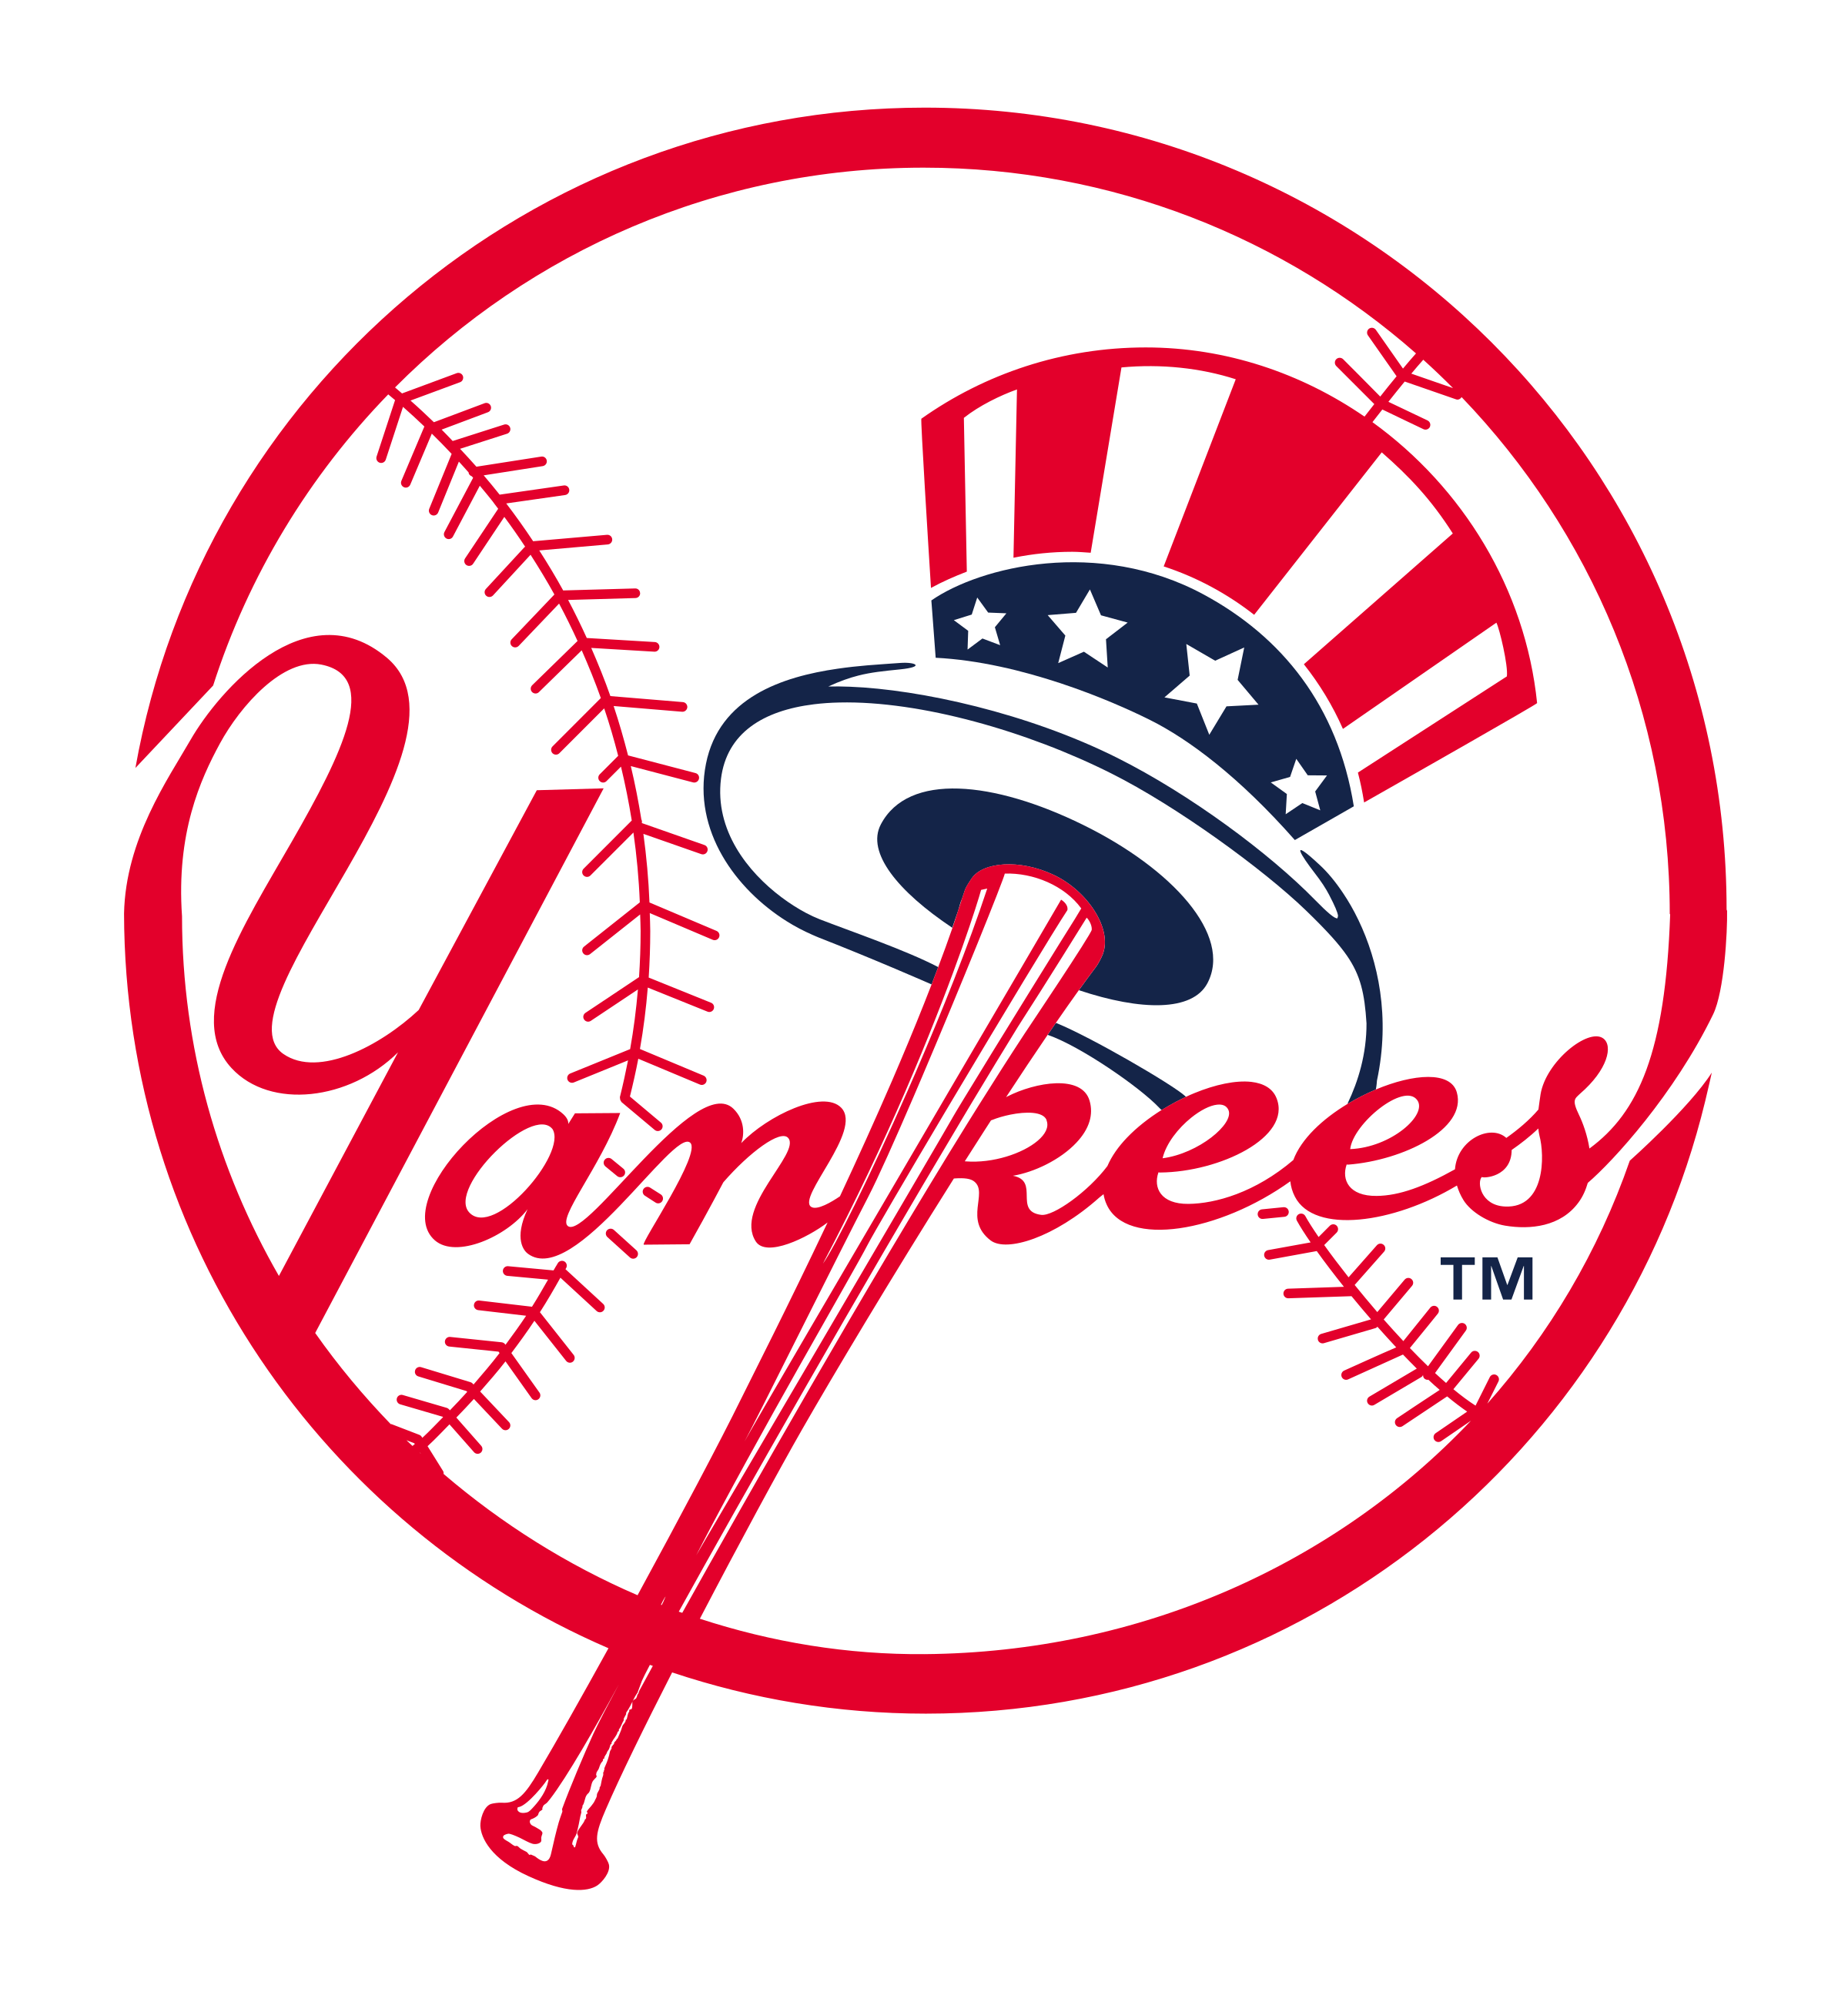 New York Yankees Odds & Bets